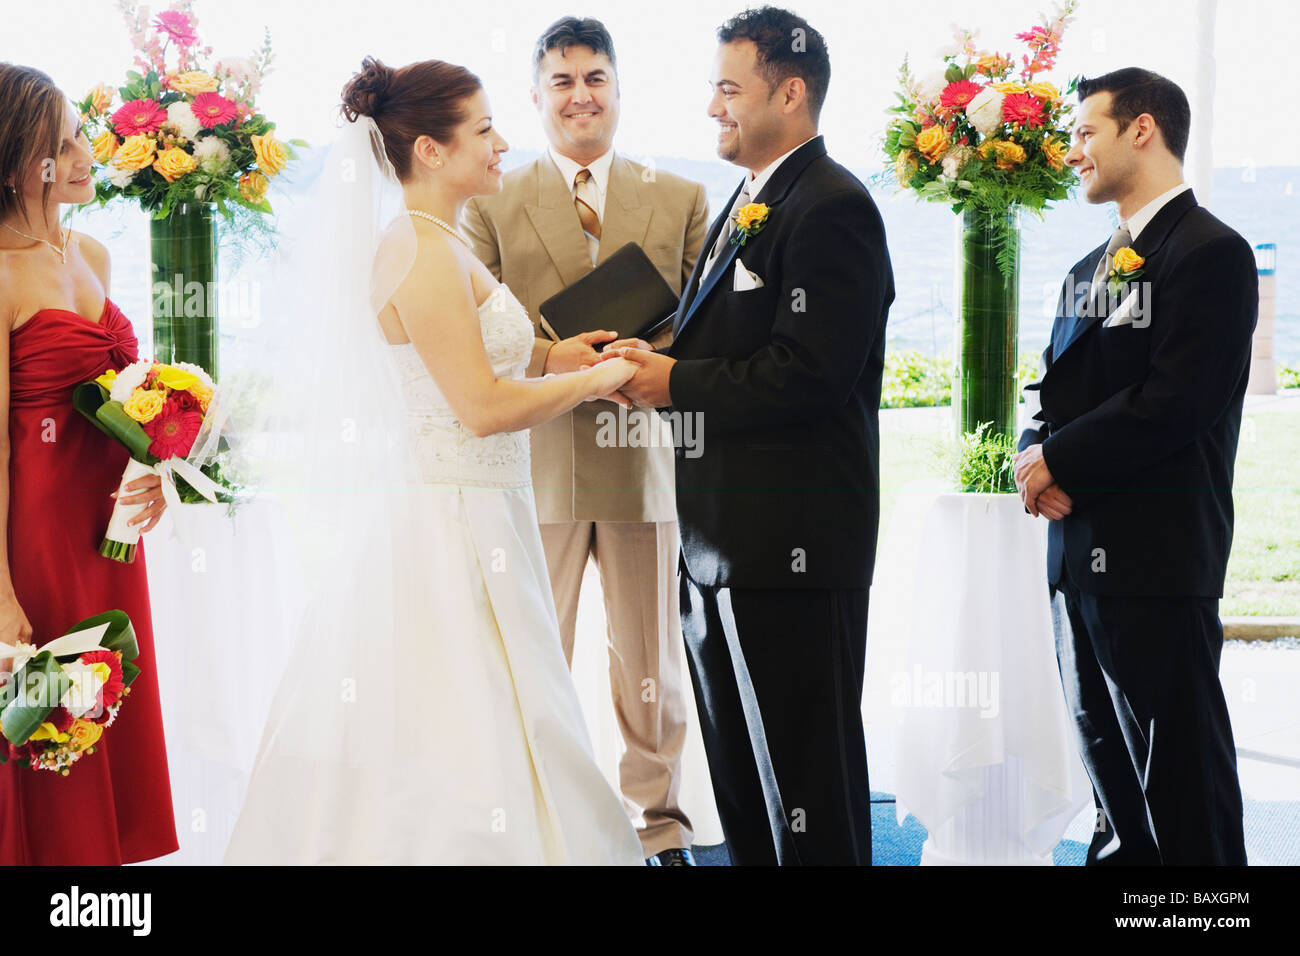 Multi-ethnic couple getting married Stock Photo